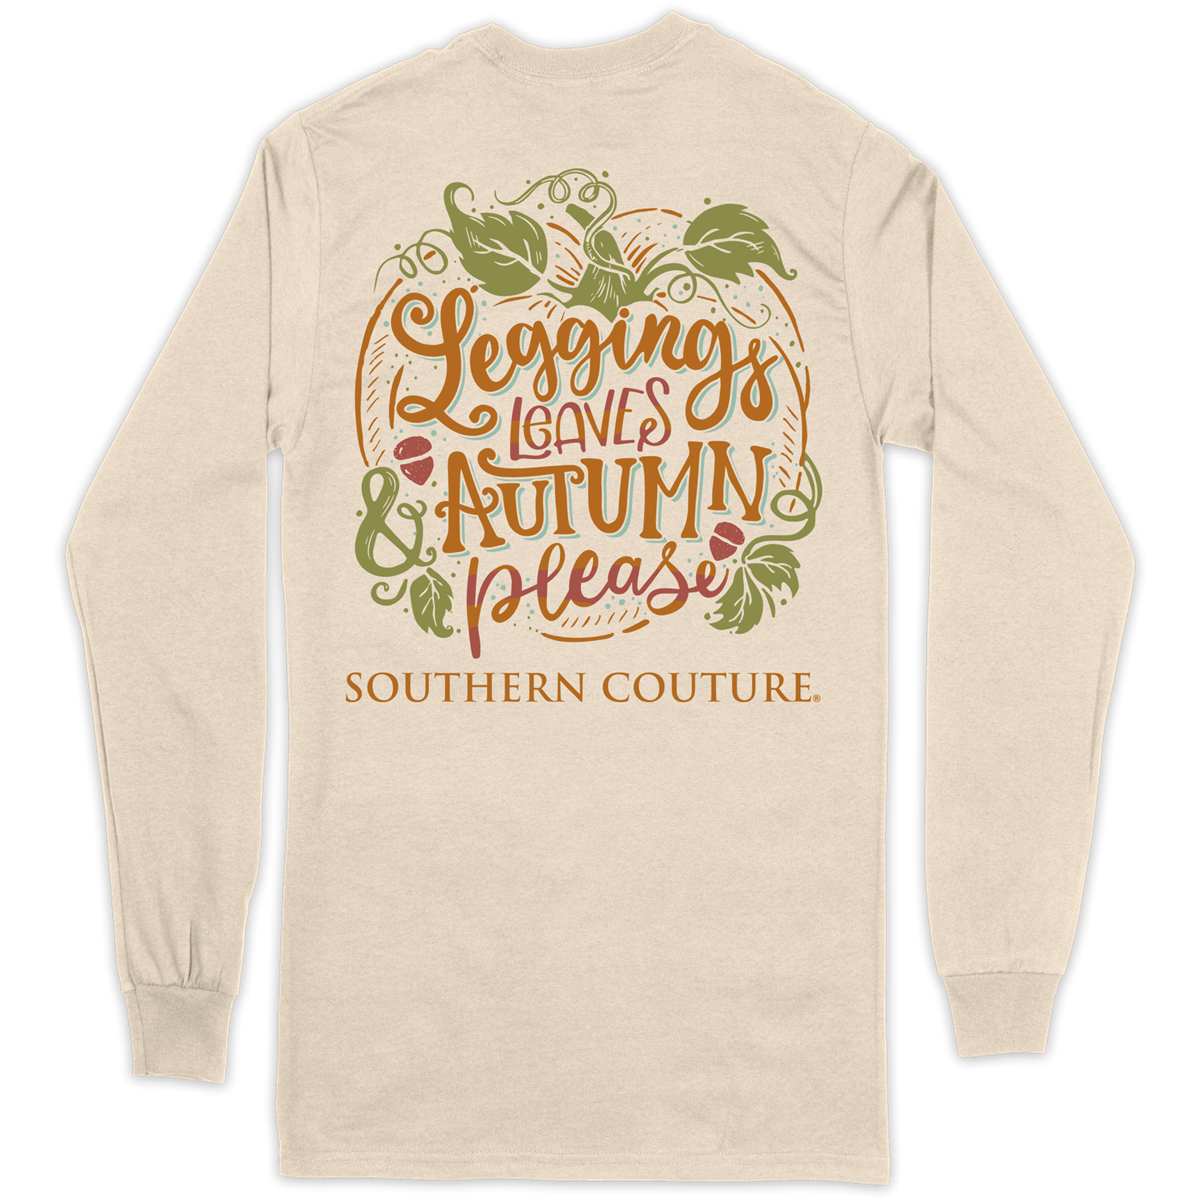 Southern Couture Classic Leggings Leaves Autumn Please Long Sleeve T-Shirt